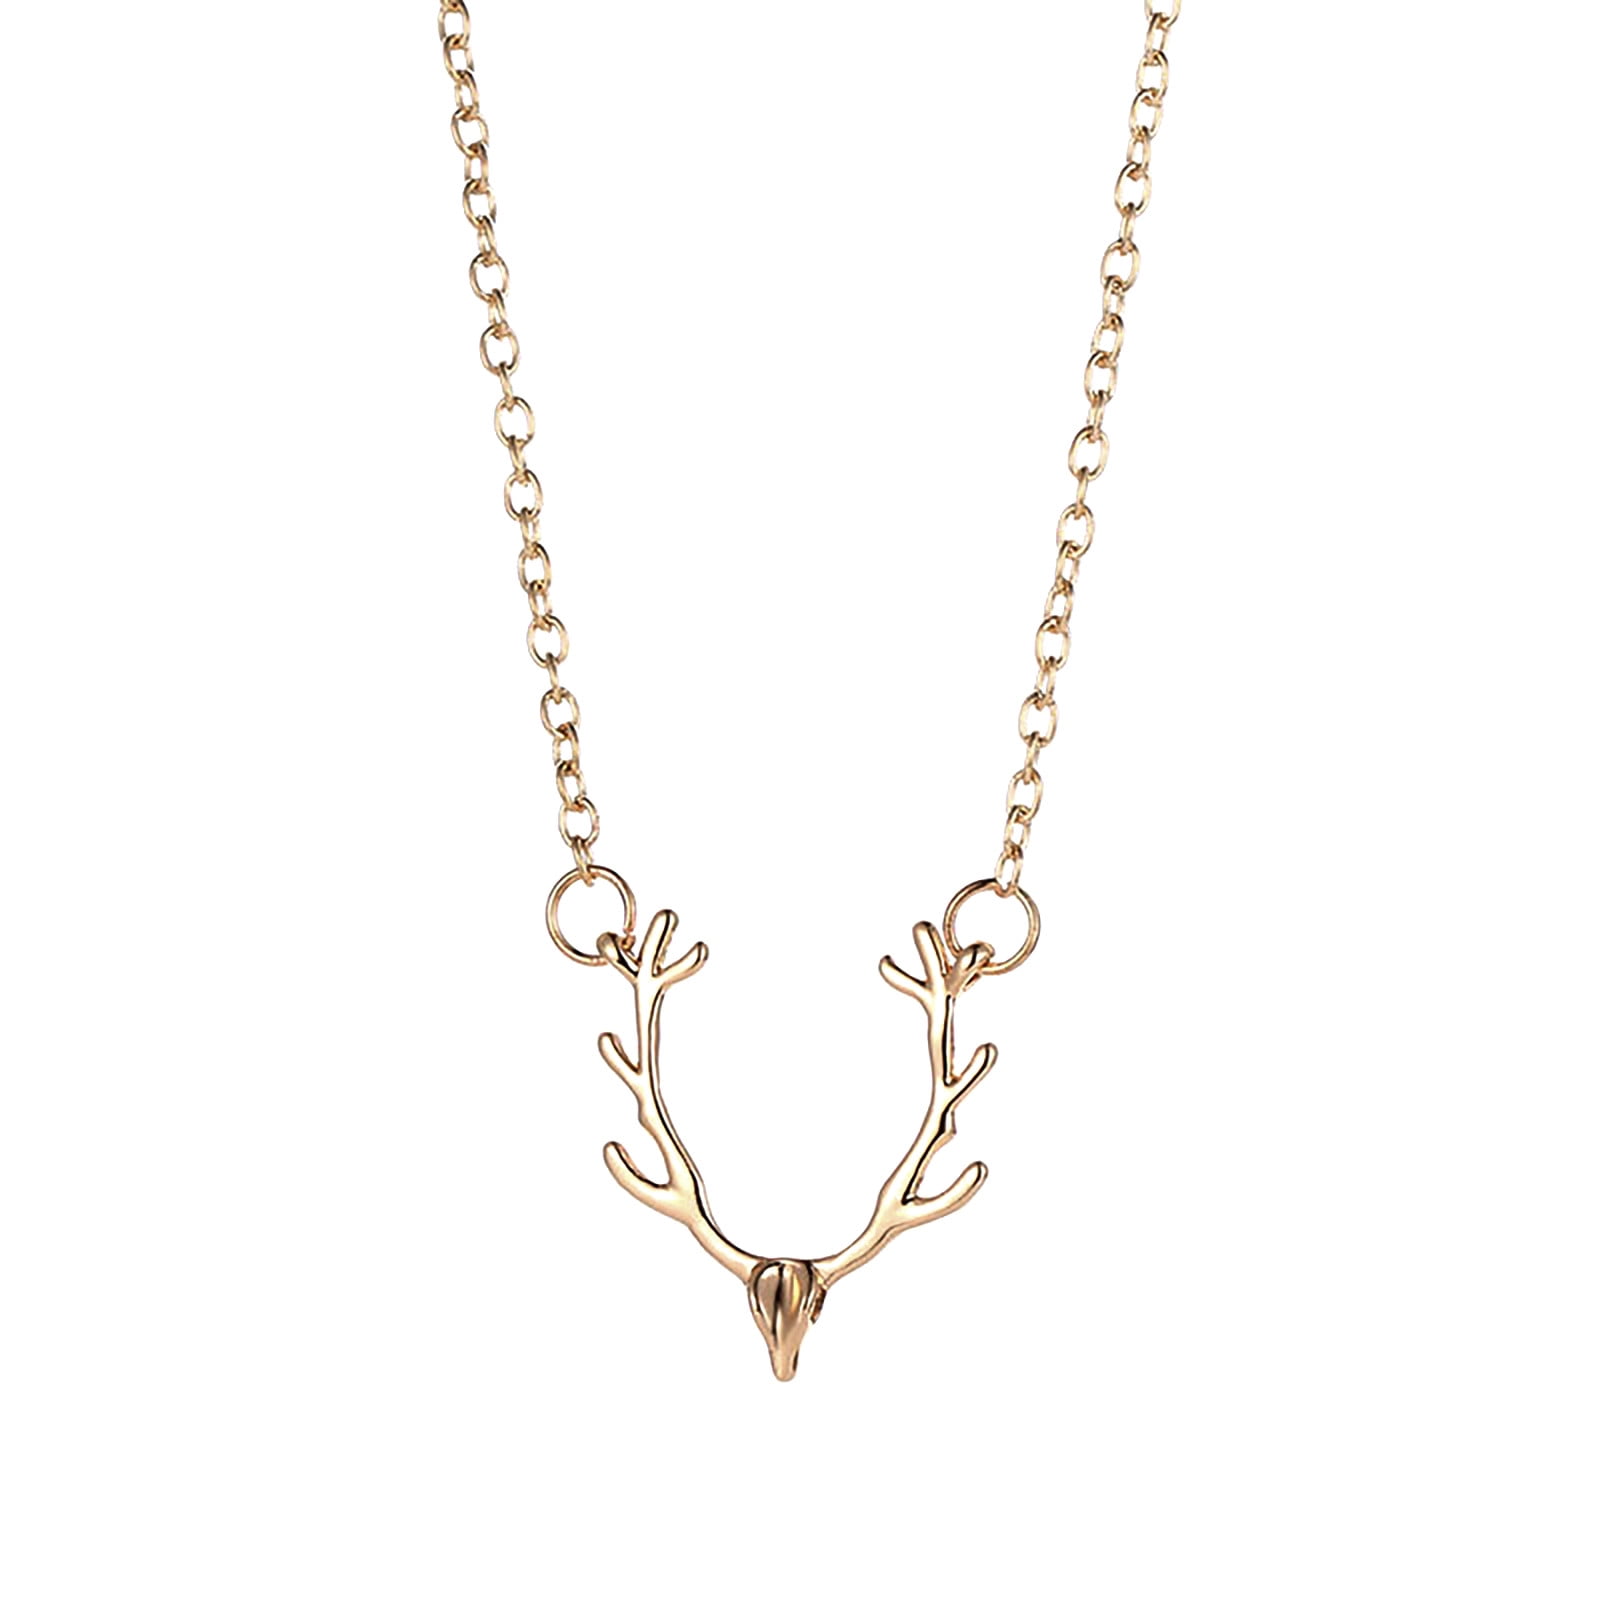 Details about   Deer Antler And Leather Choker-style Necklace 